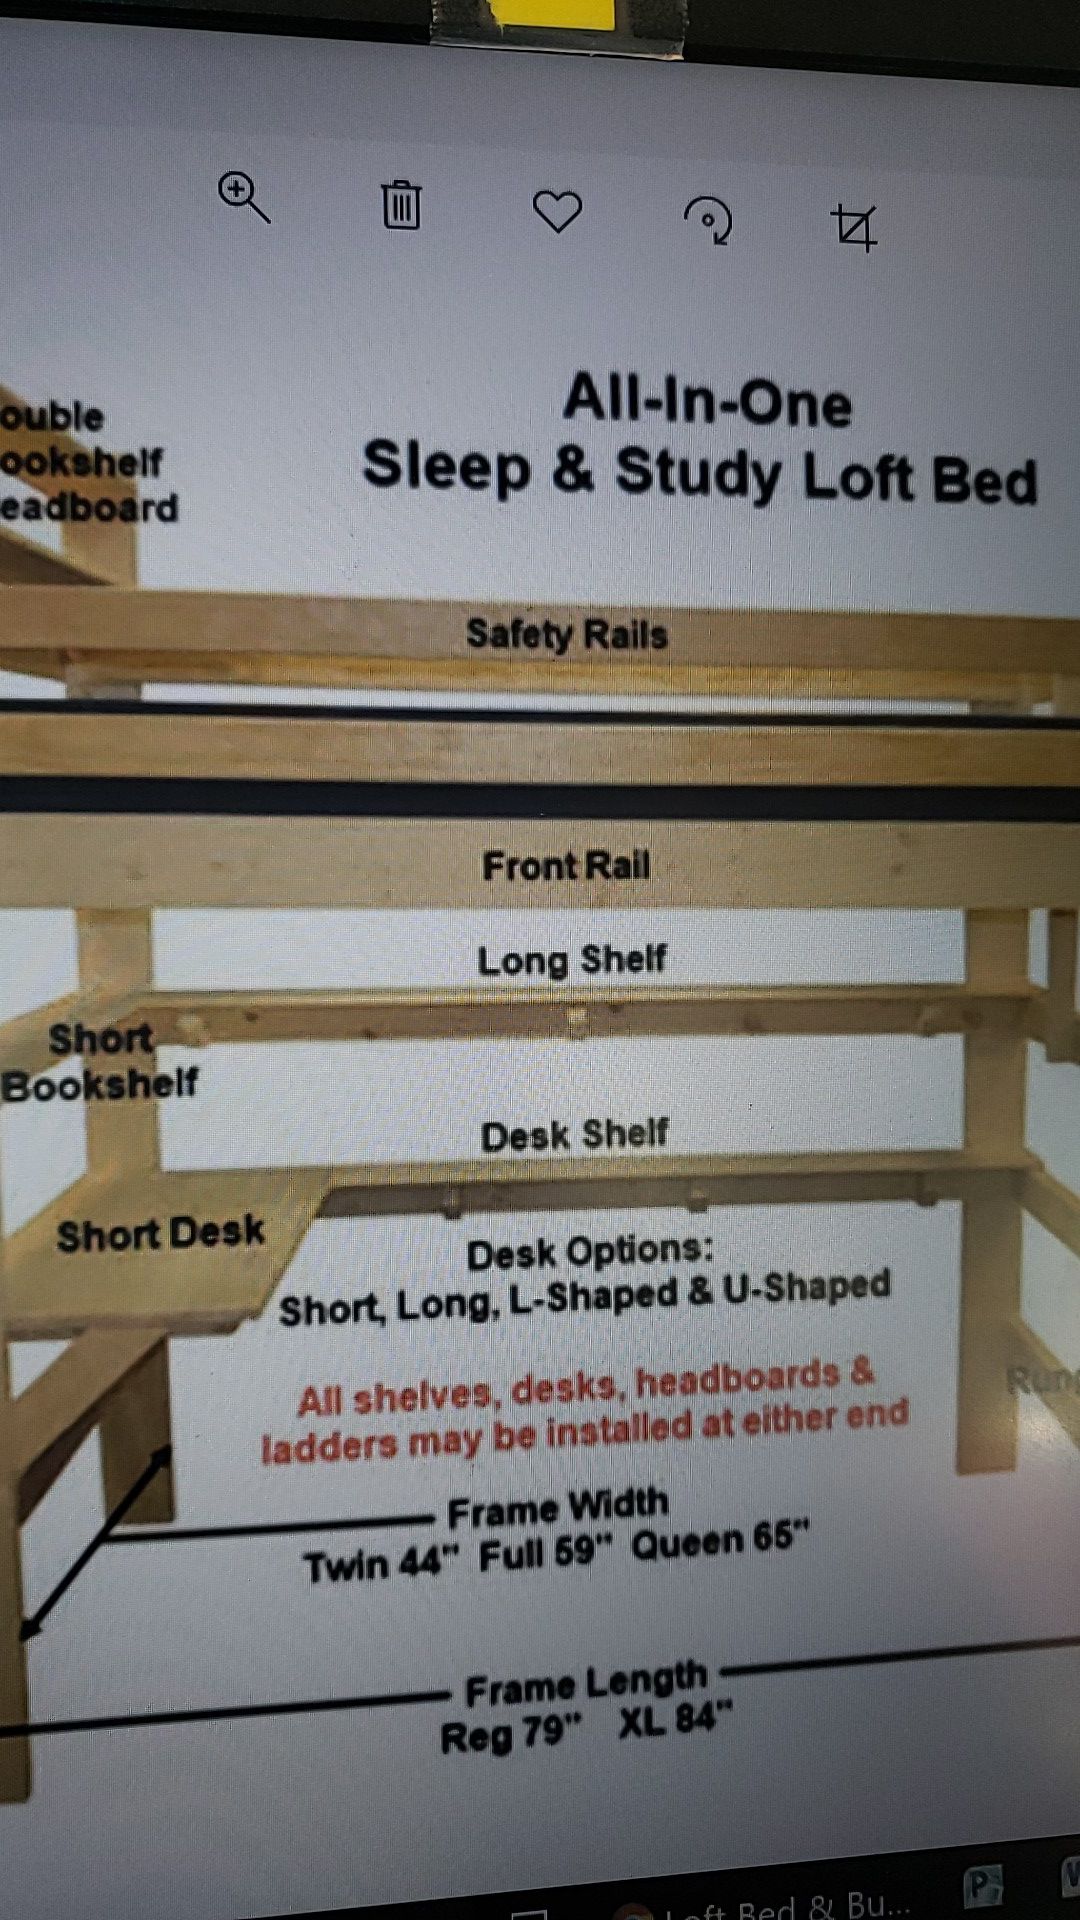 All in one sleep and study loft bed from College Loft Beds